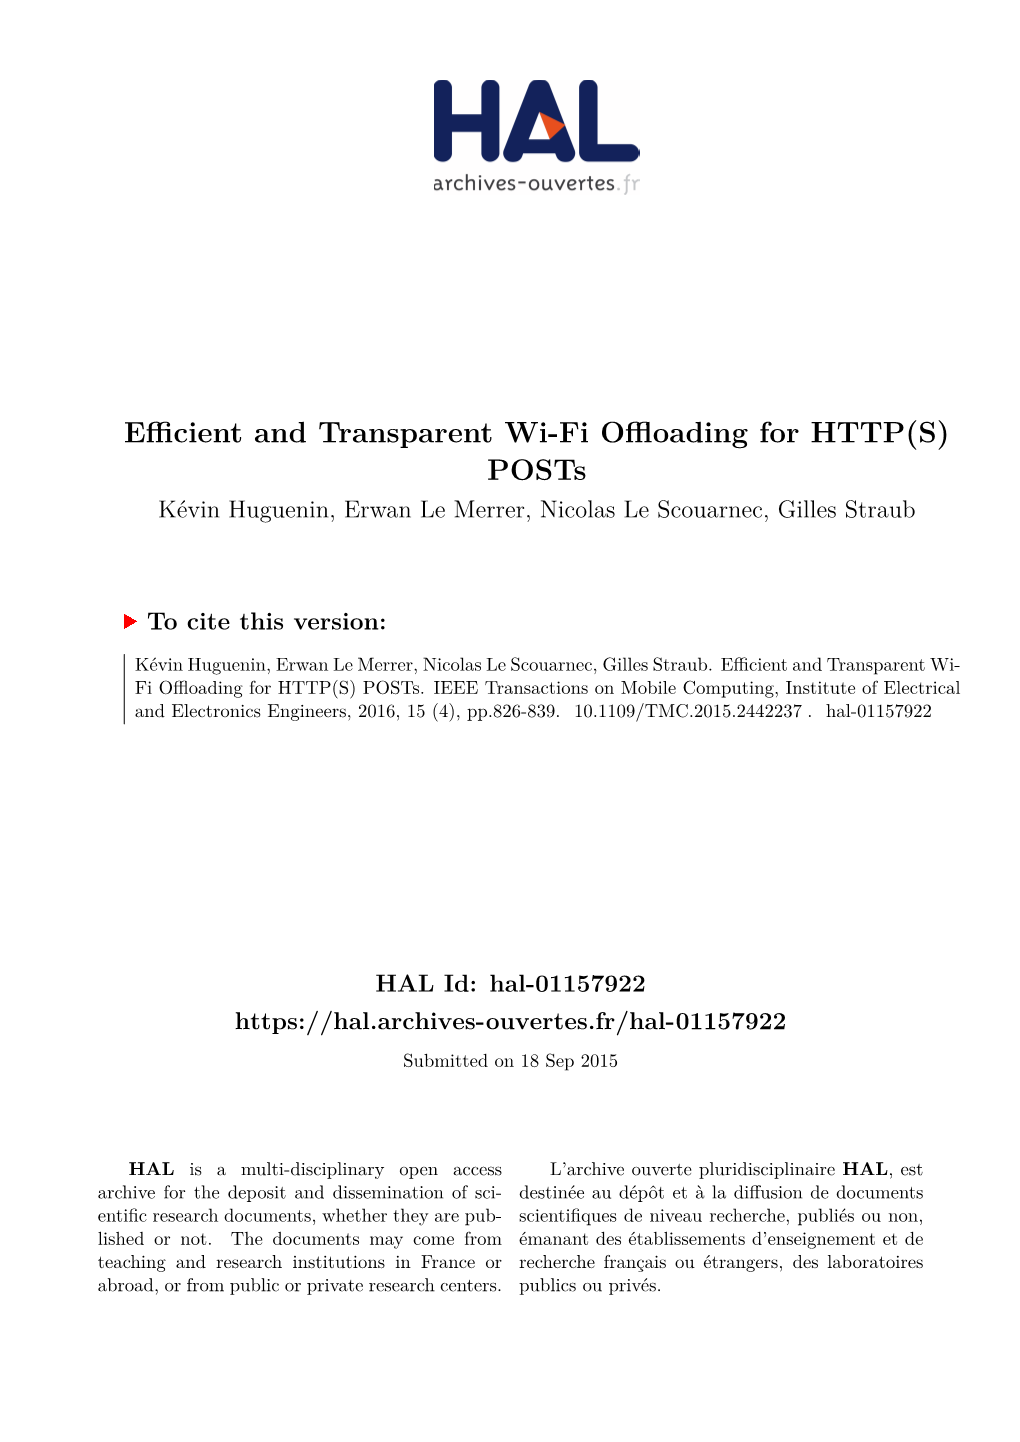 Efficient and Transparent Wi-Fi Offloading for HTTP(S) Posts